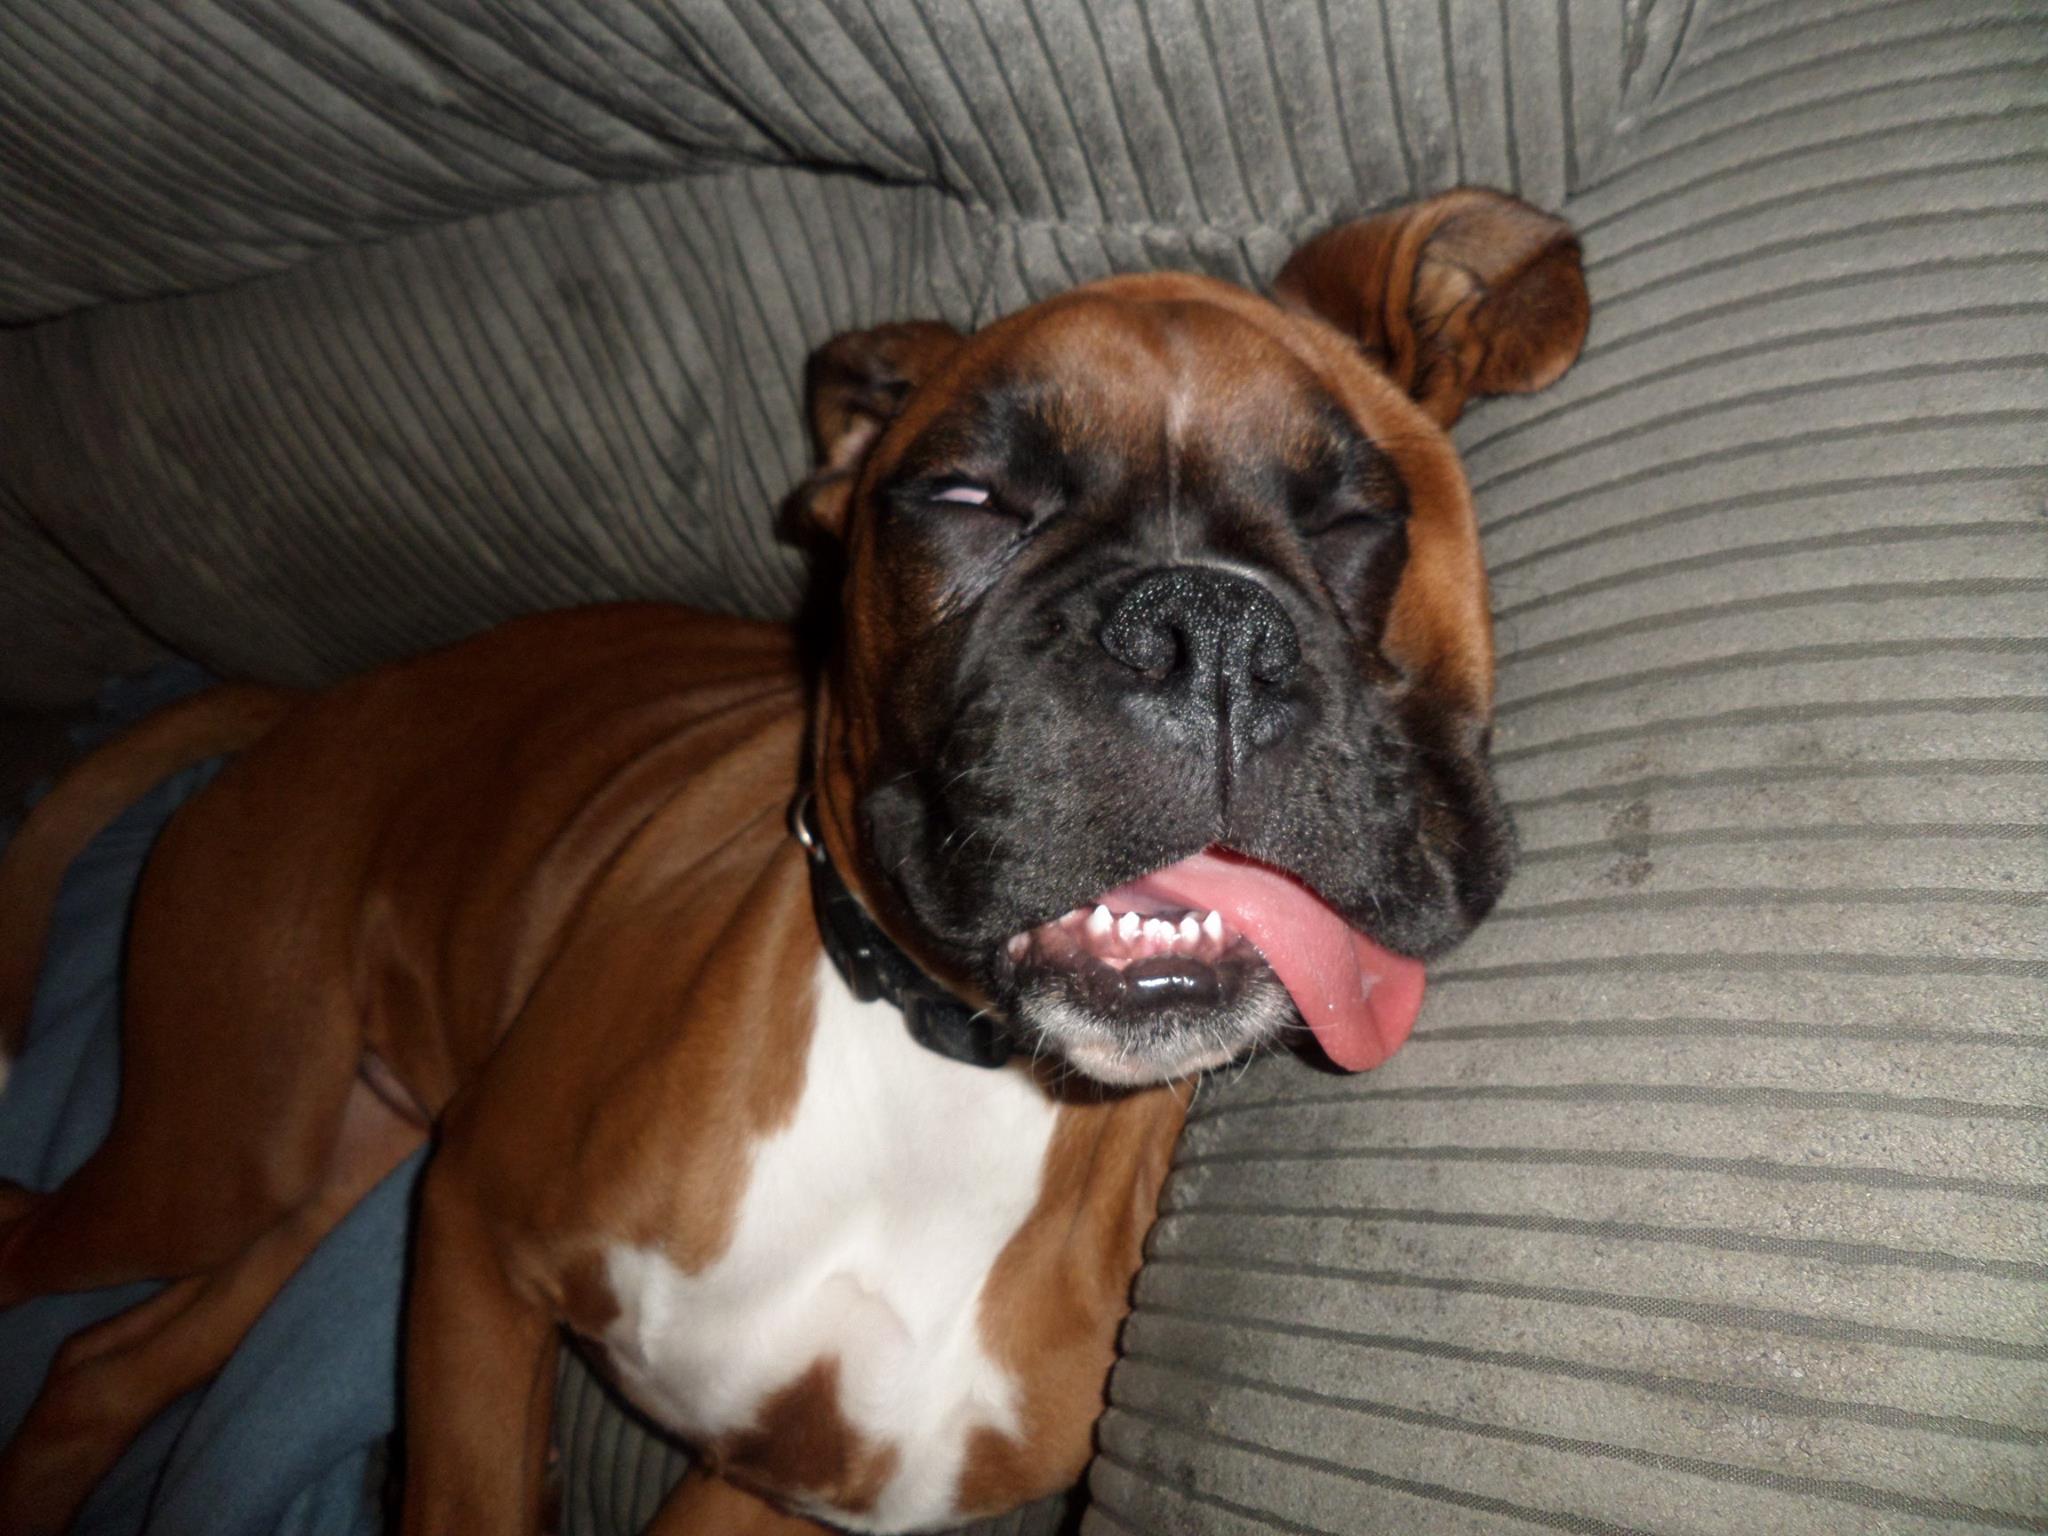 A boxer dog sleeping on the couch with its tongue sticking out